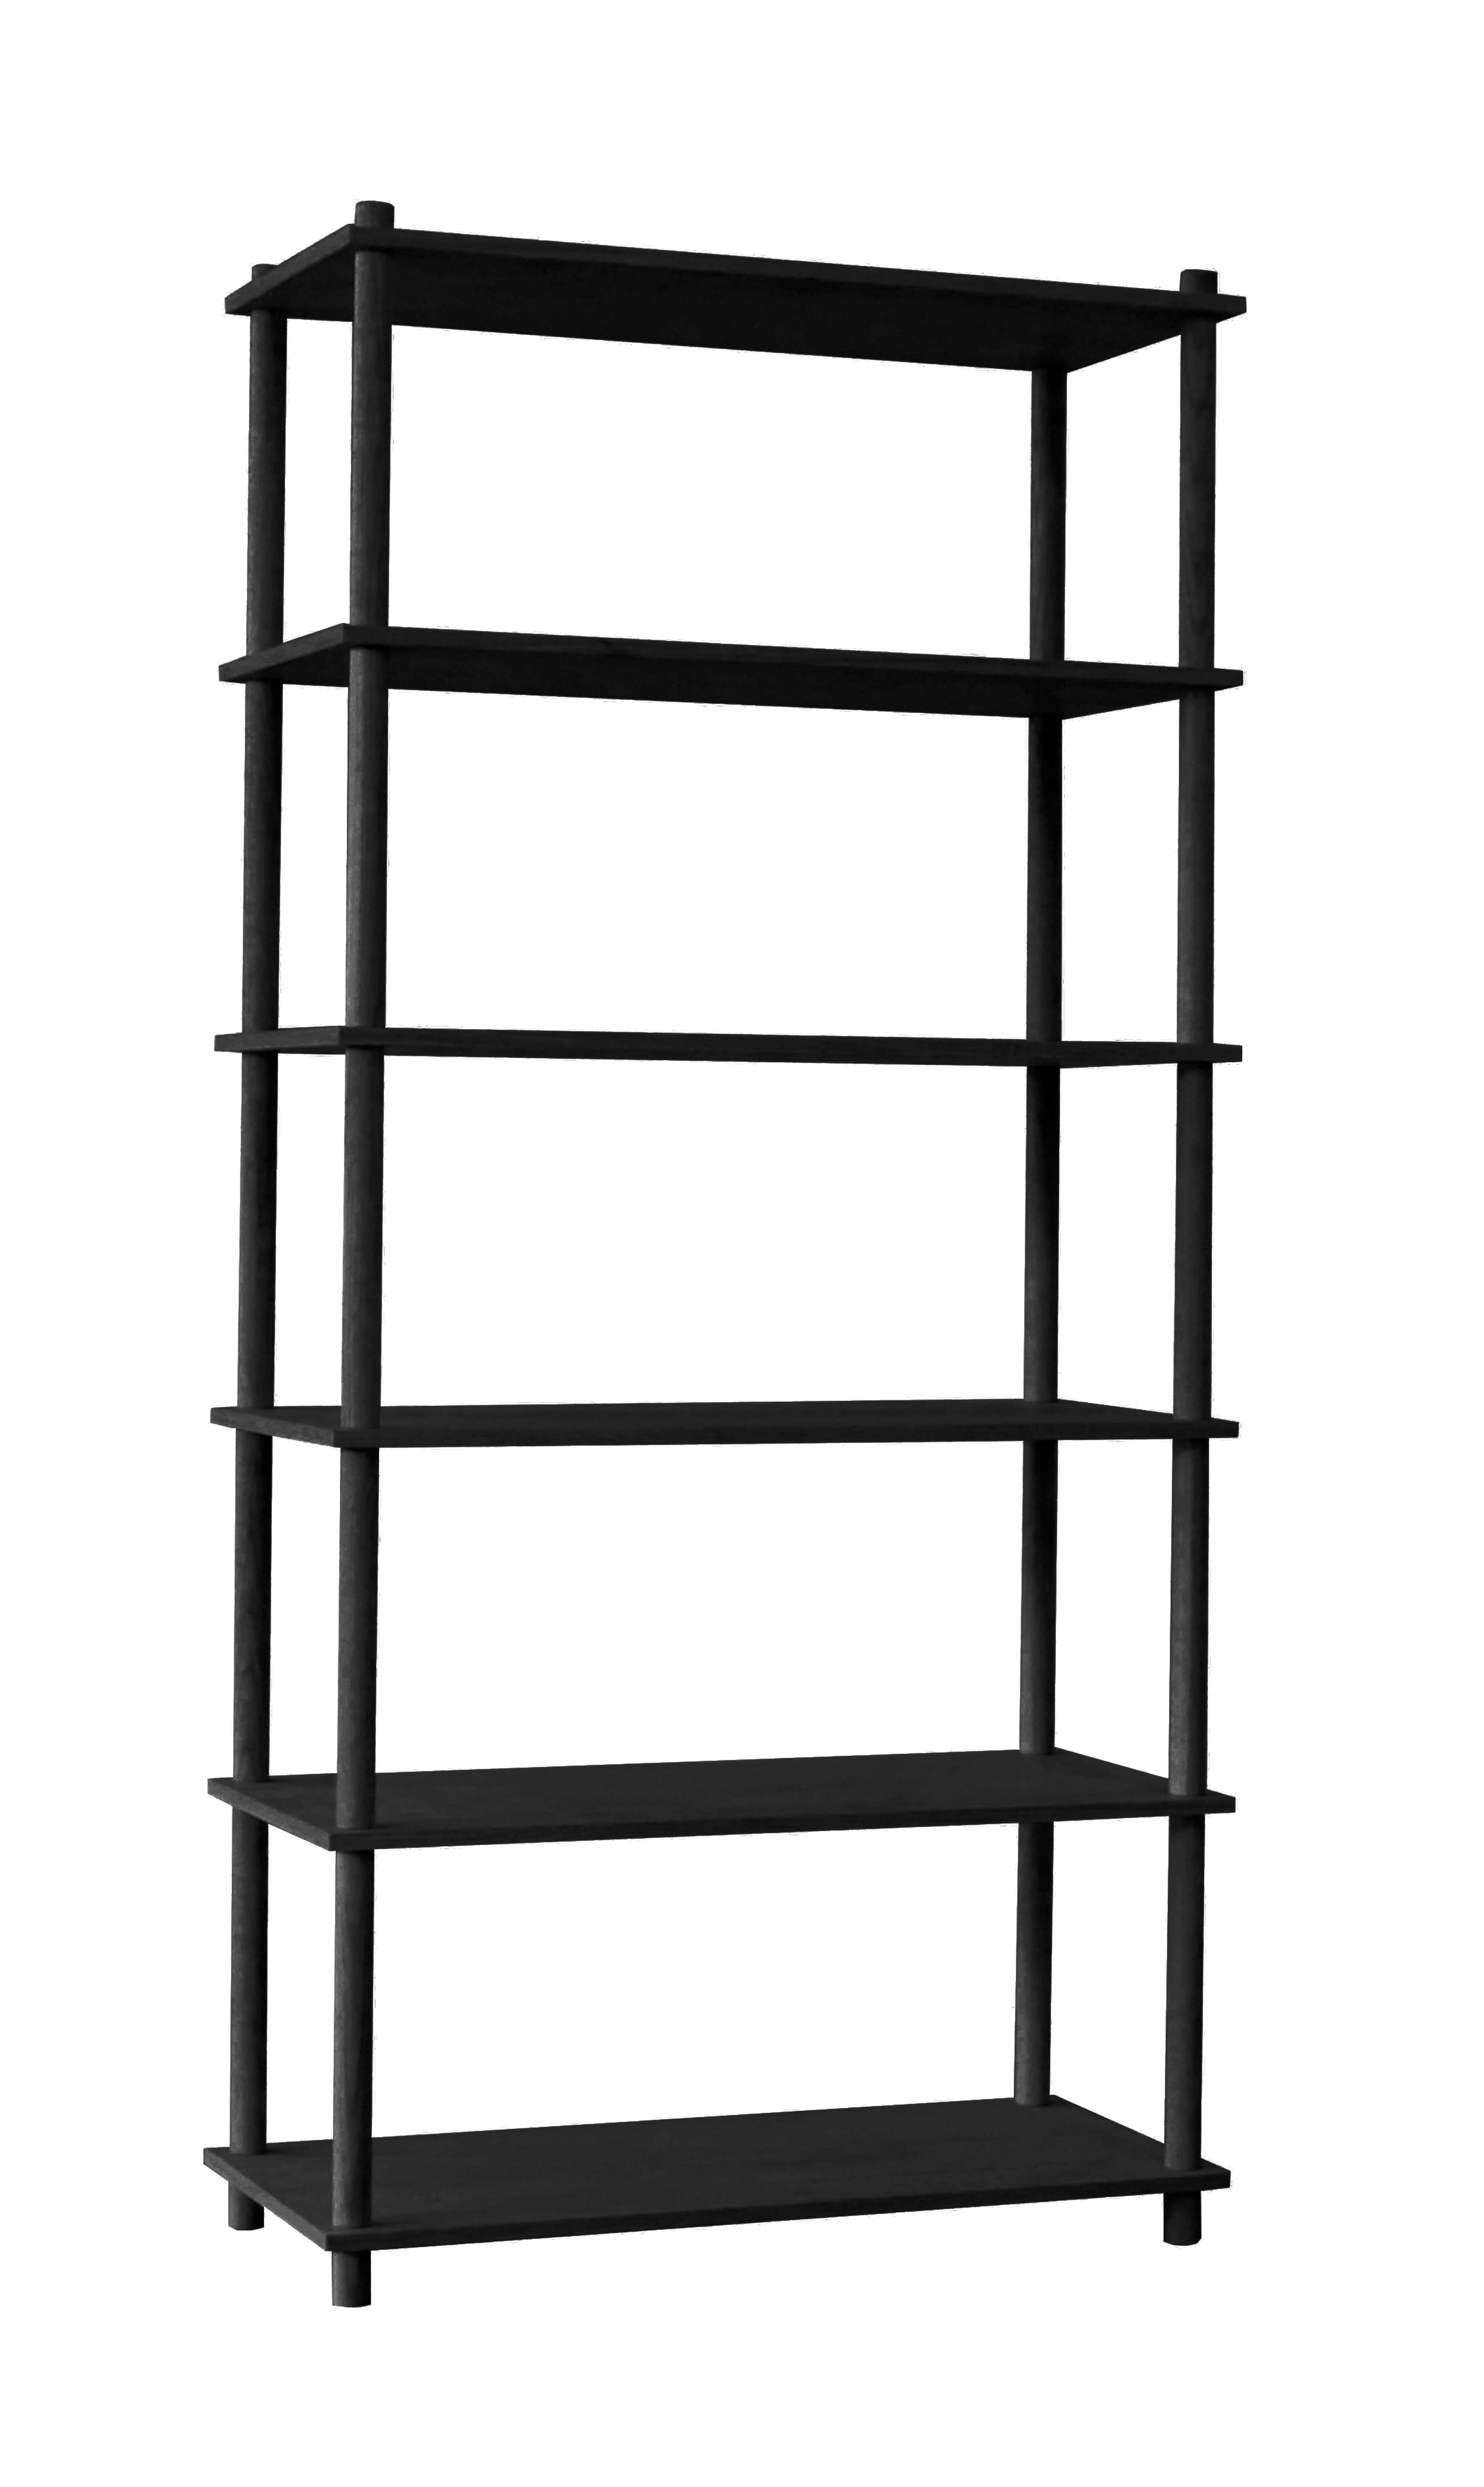 Black Oak Elevate shelving V by Camilla Akersveen and Christopher Konings.
Materials: Metal, oak.
Dimensions: D 40 x W 86.8 x H 182.6 cm.
Available in matt lacquered oak or black oak. Different shelving sistems available.

Camilla Akersveen and